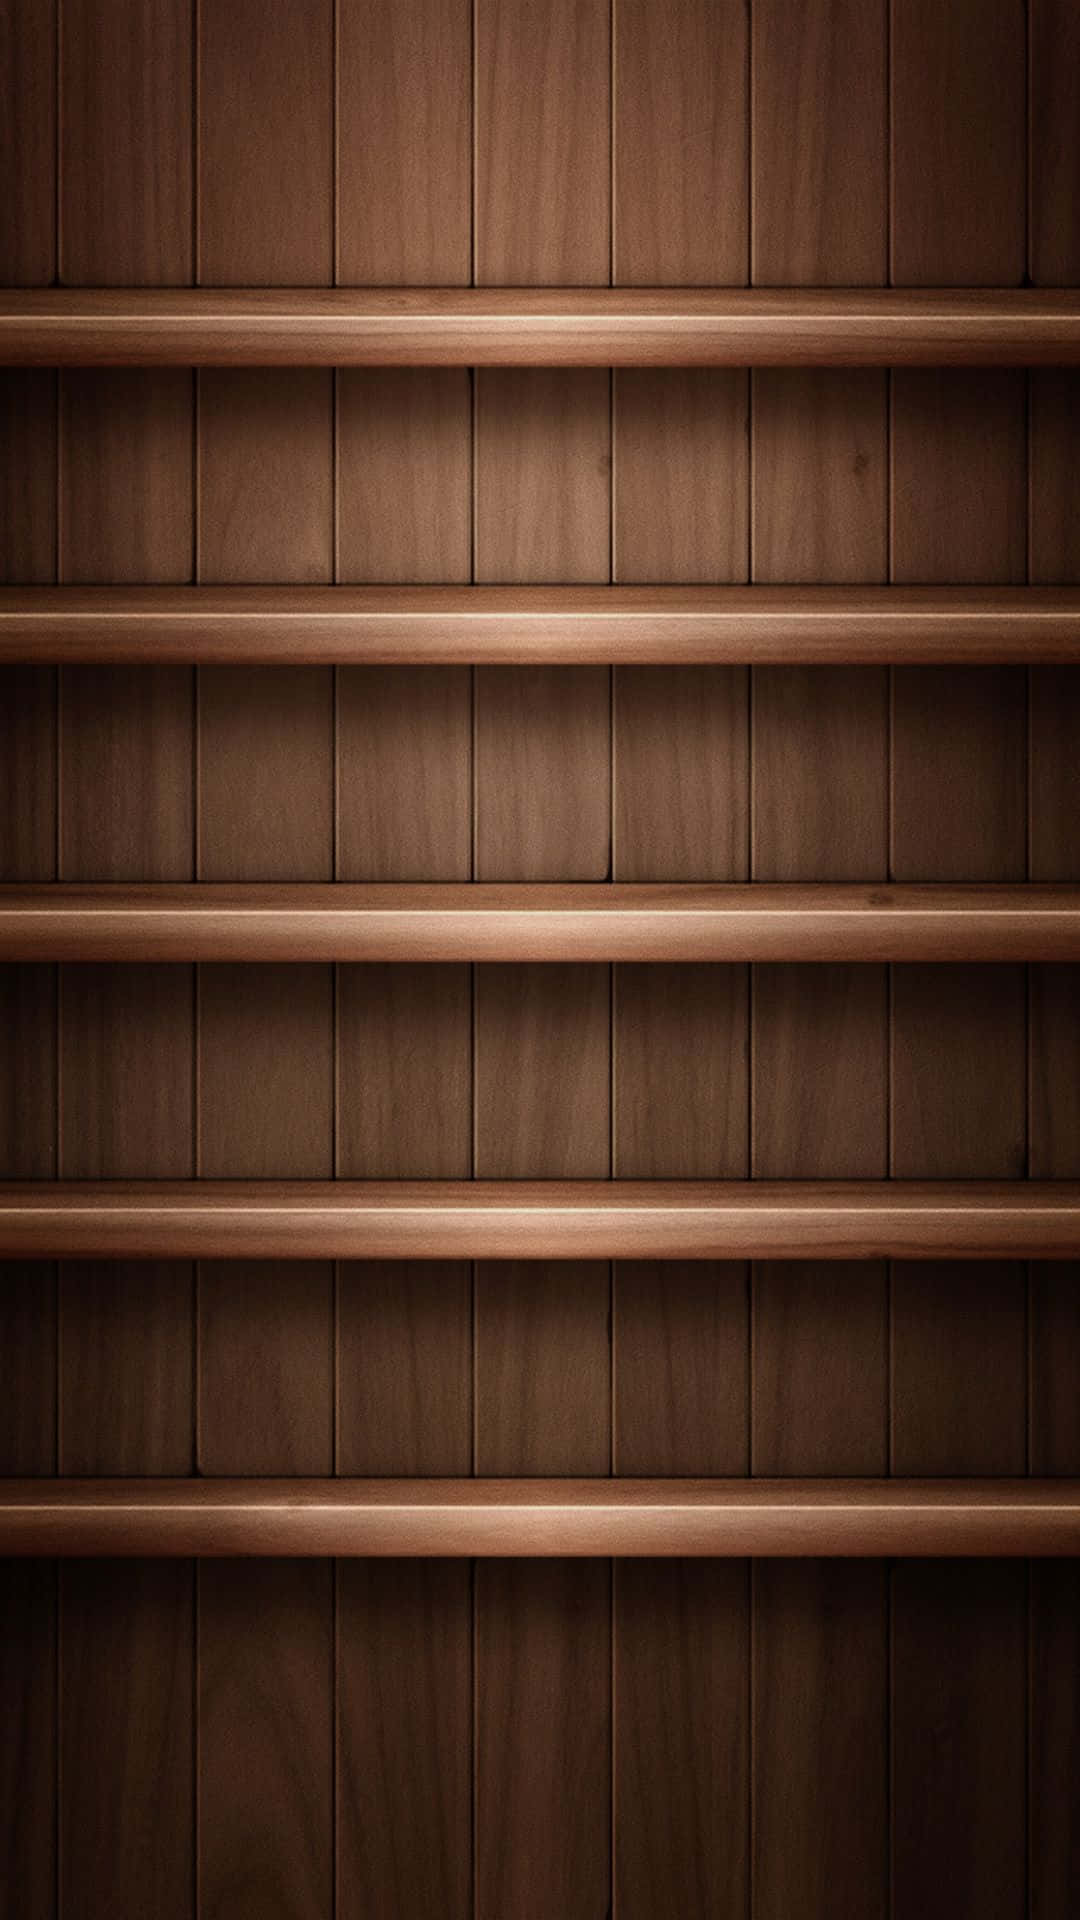 Wooden Shelves On A Wooden Wall